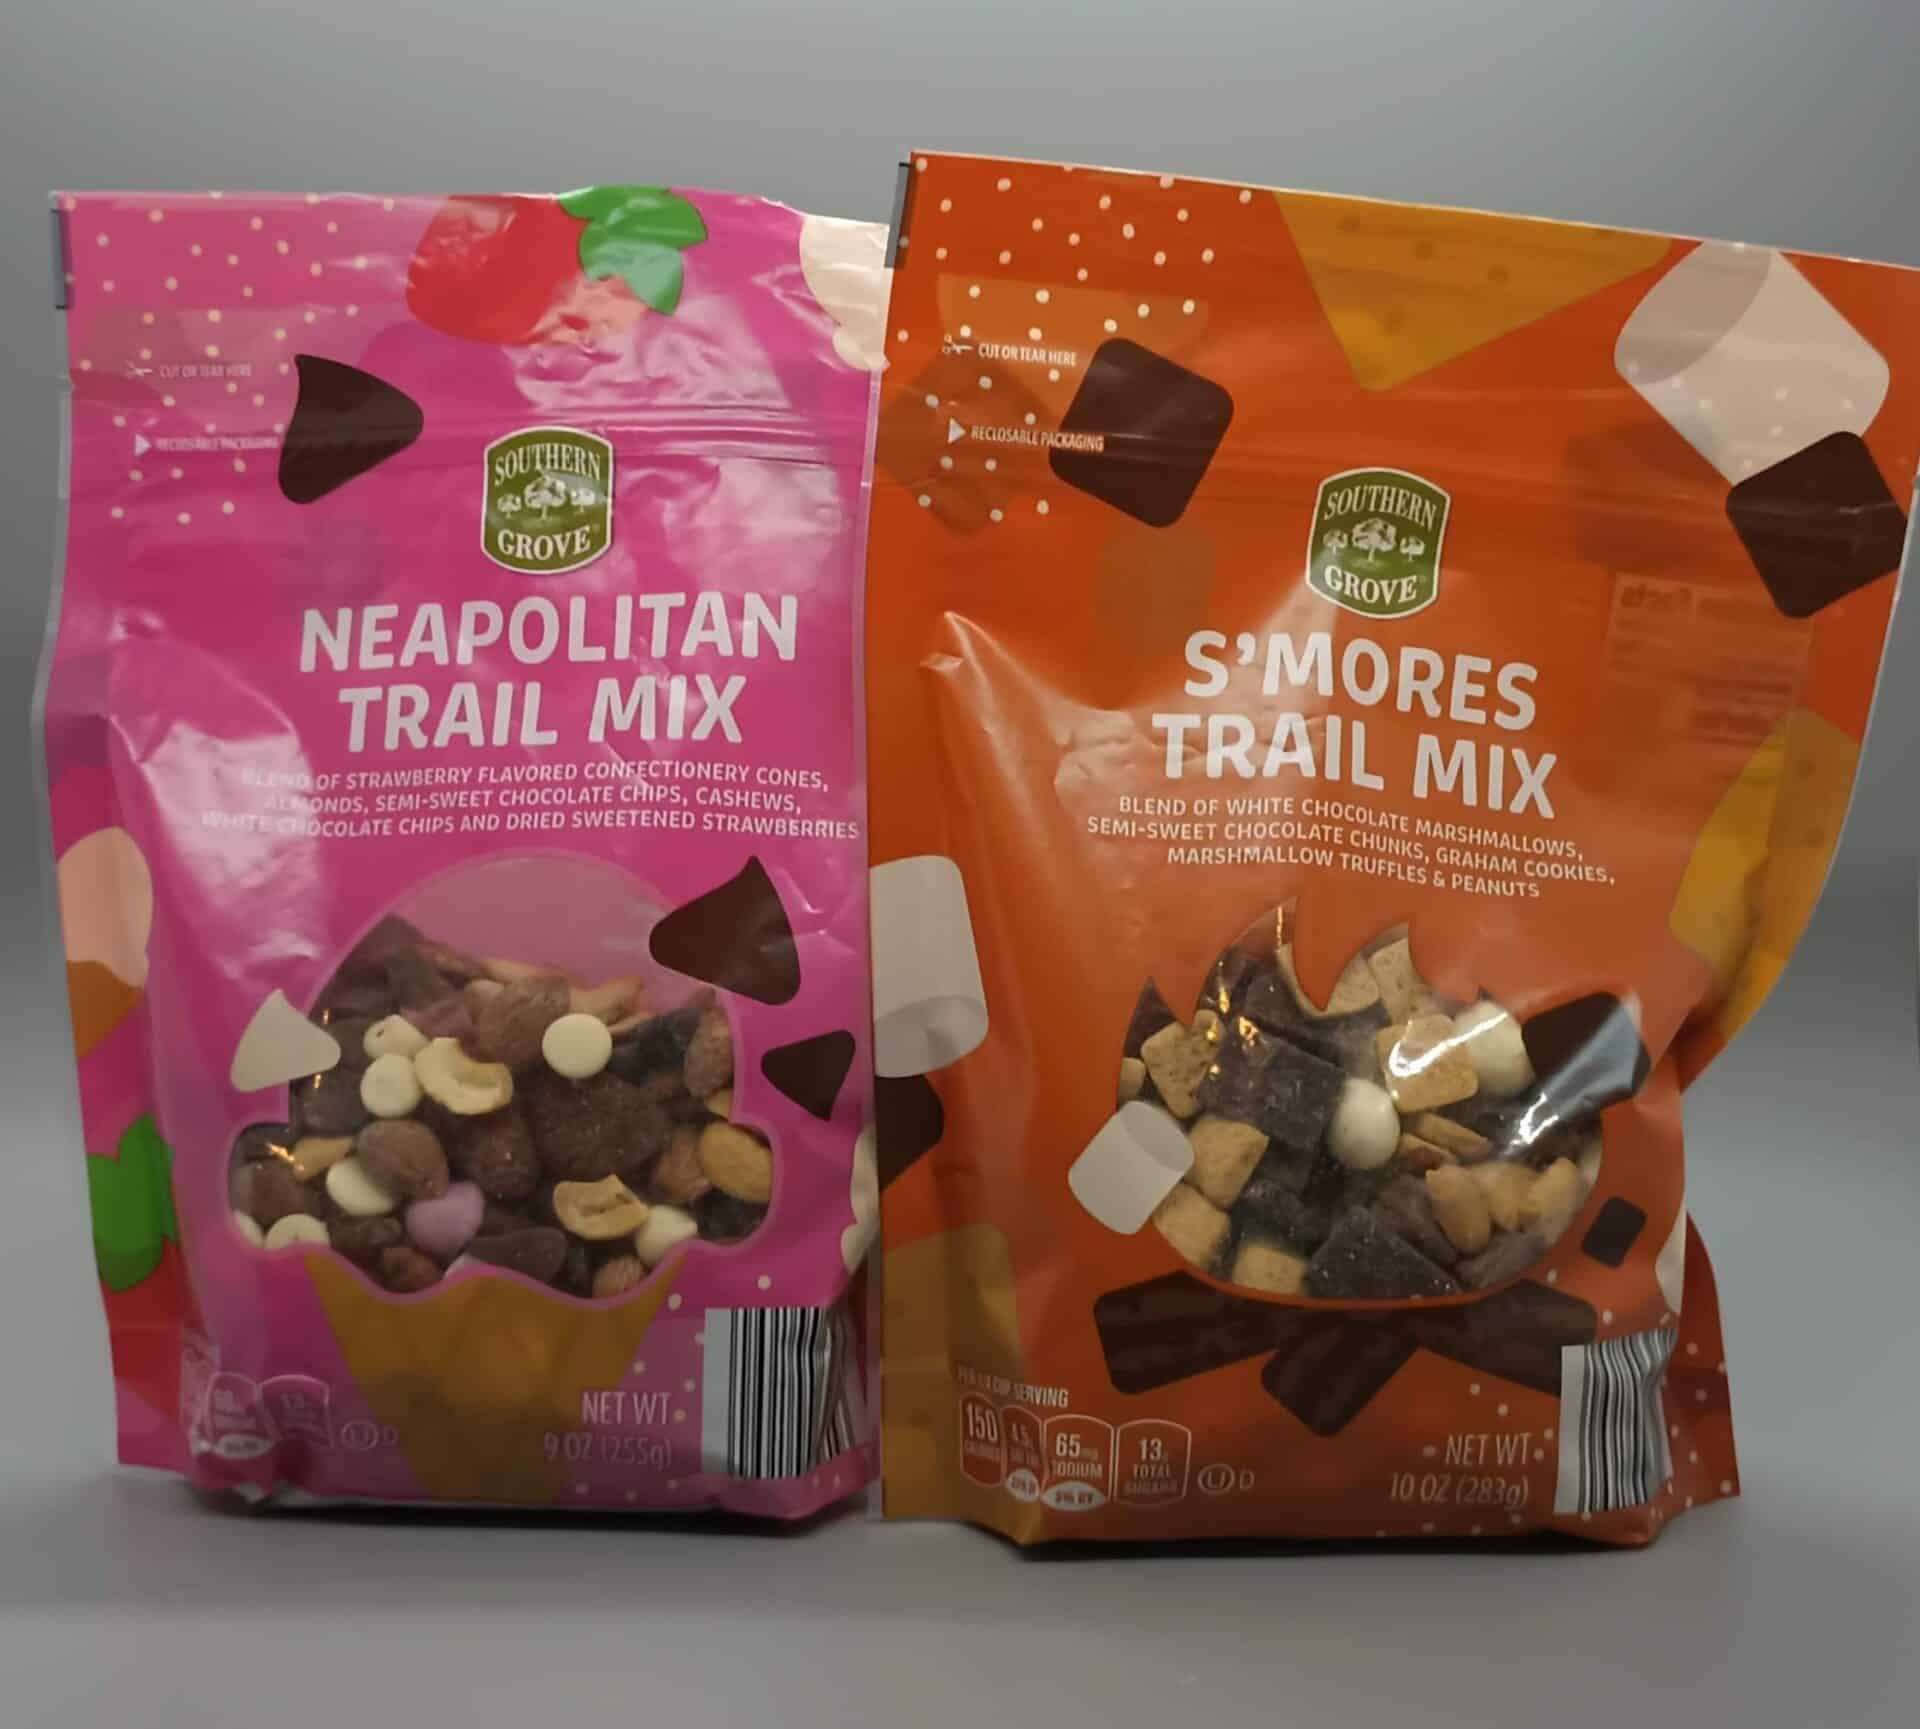 Southern Grove Neapolitan Trail Mix and Southern Grove S'mores Trail Mix